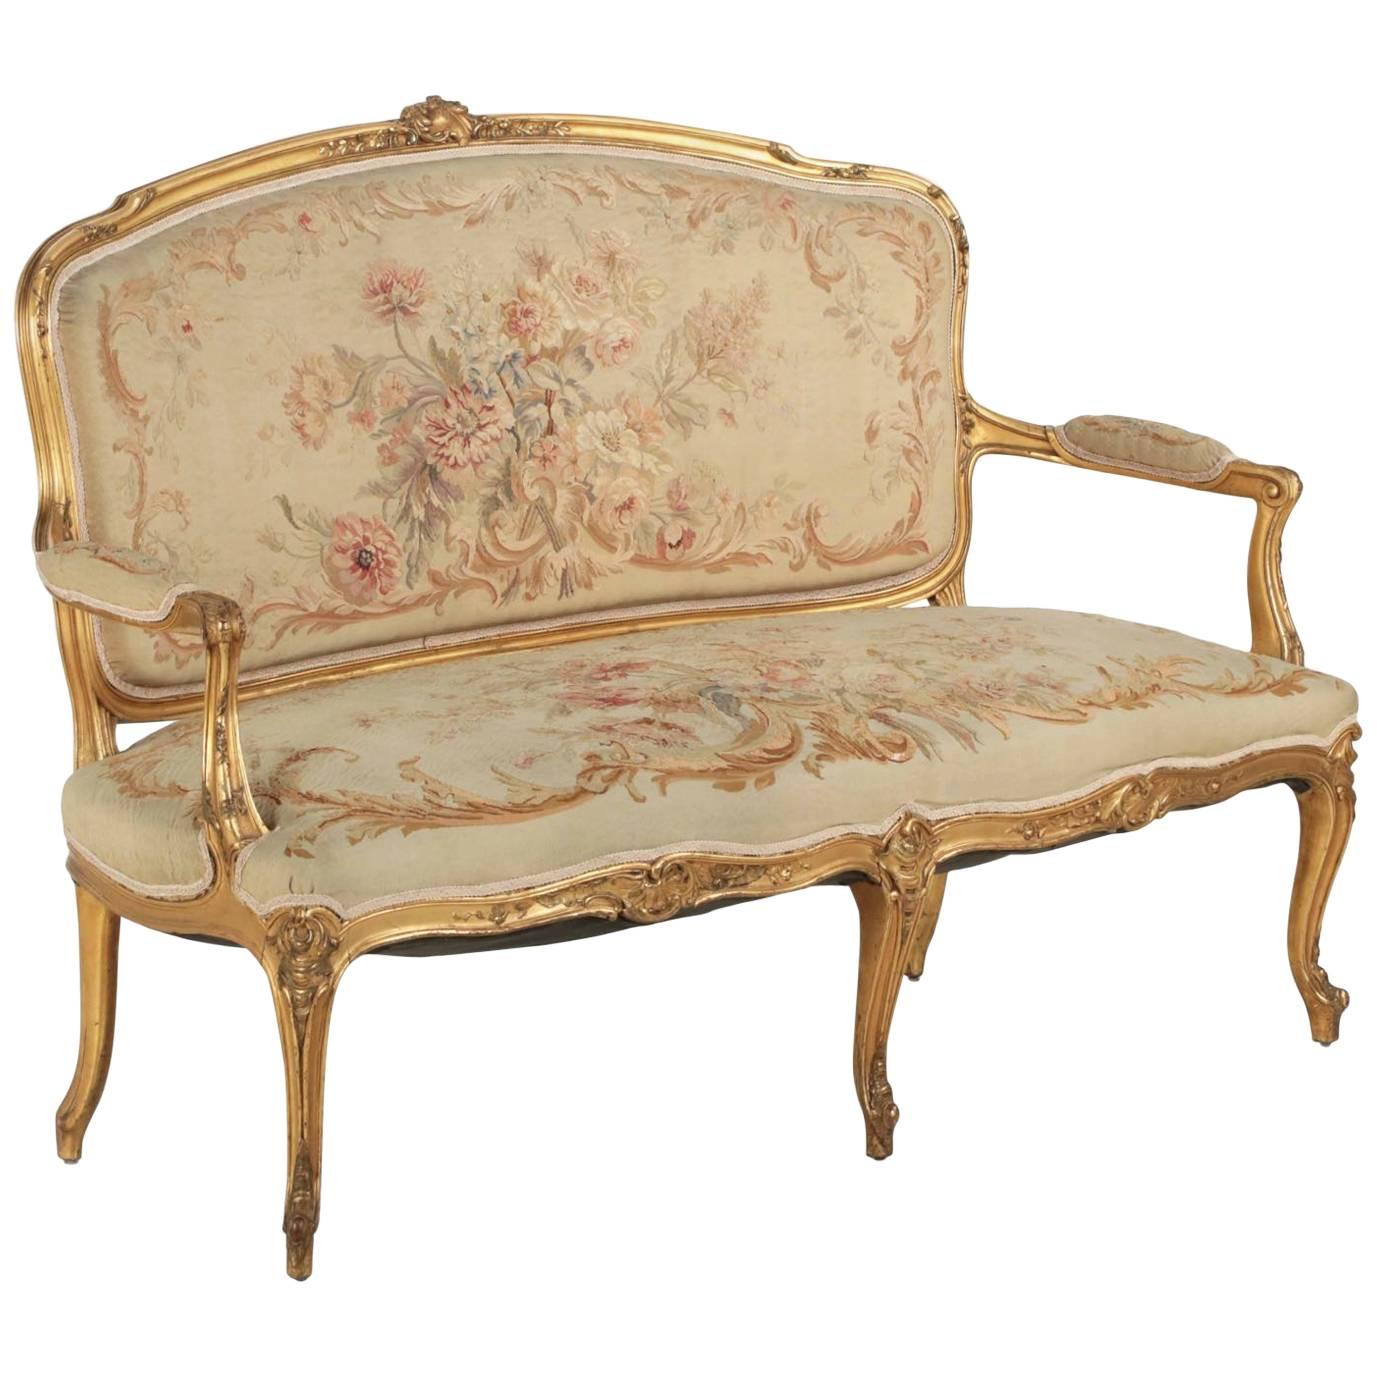 French Louis XV Style Carved Giltwood Antique Settee Sofa, circa 1900